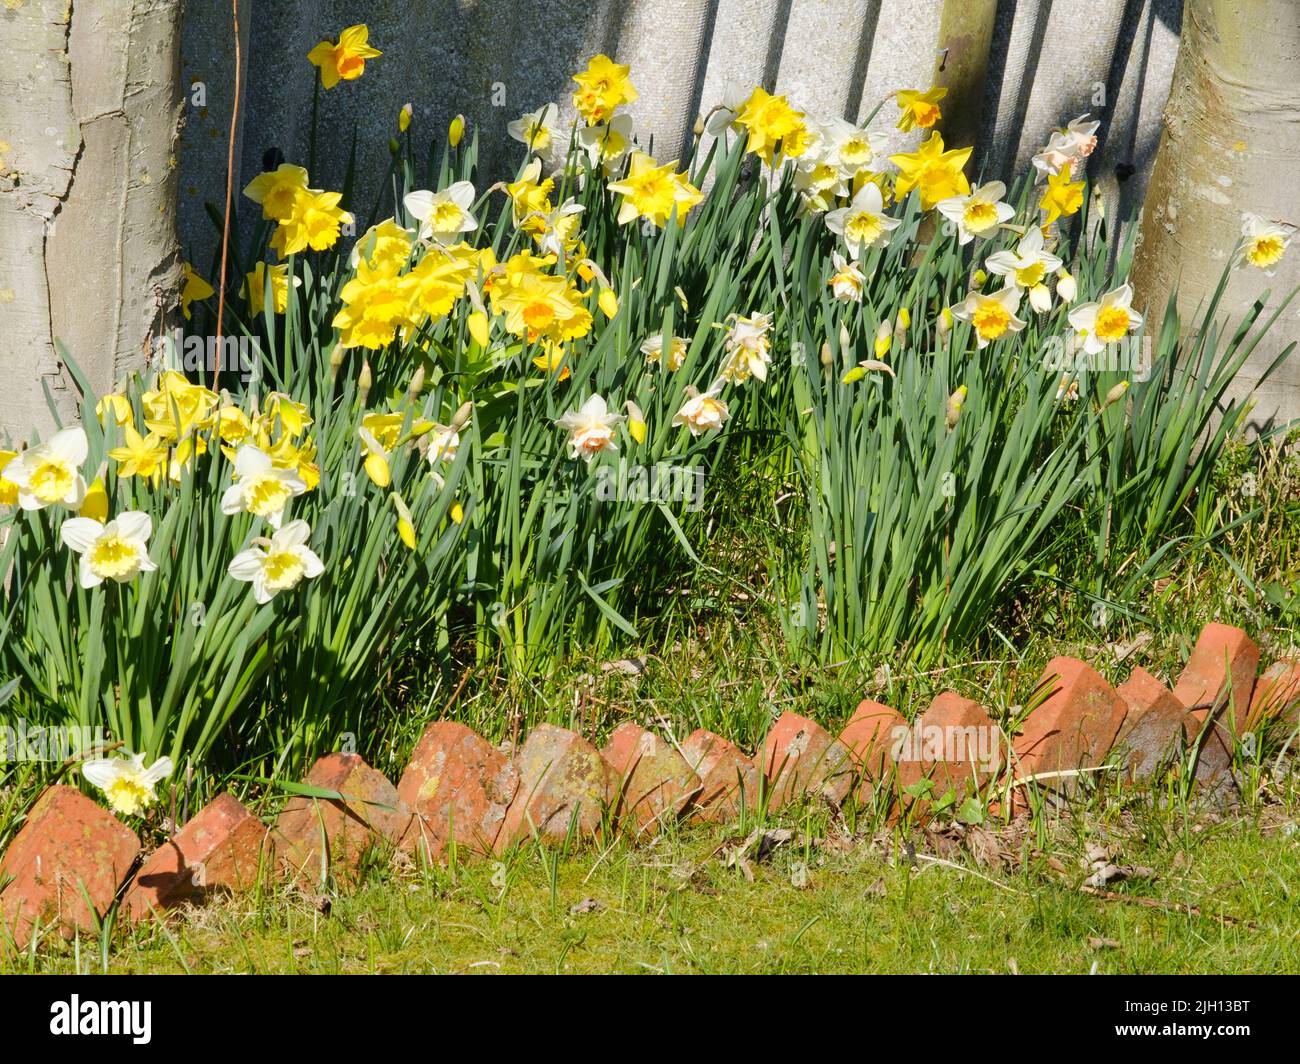 Blossom Daffodil at a Garden Stock Photo